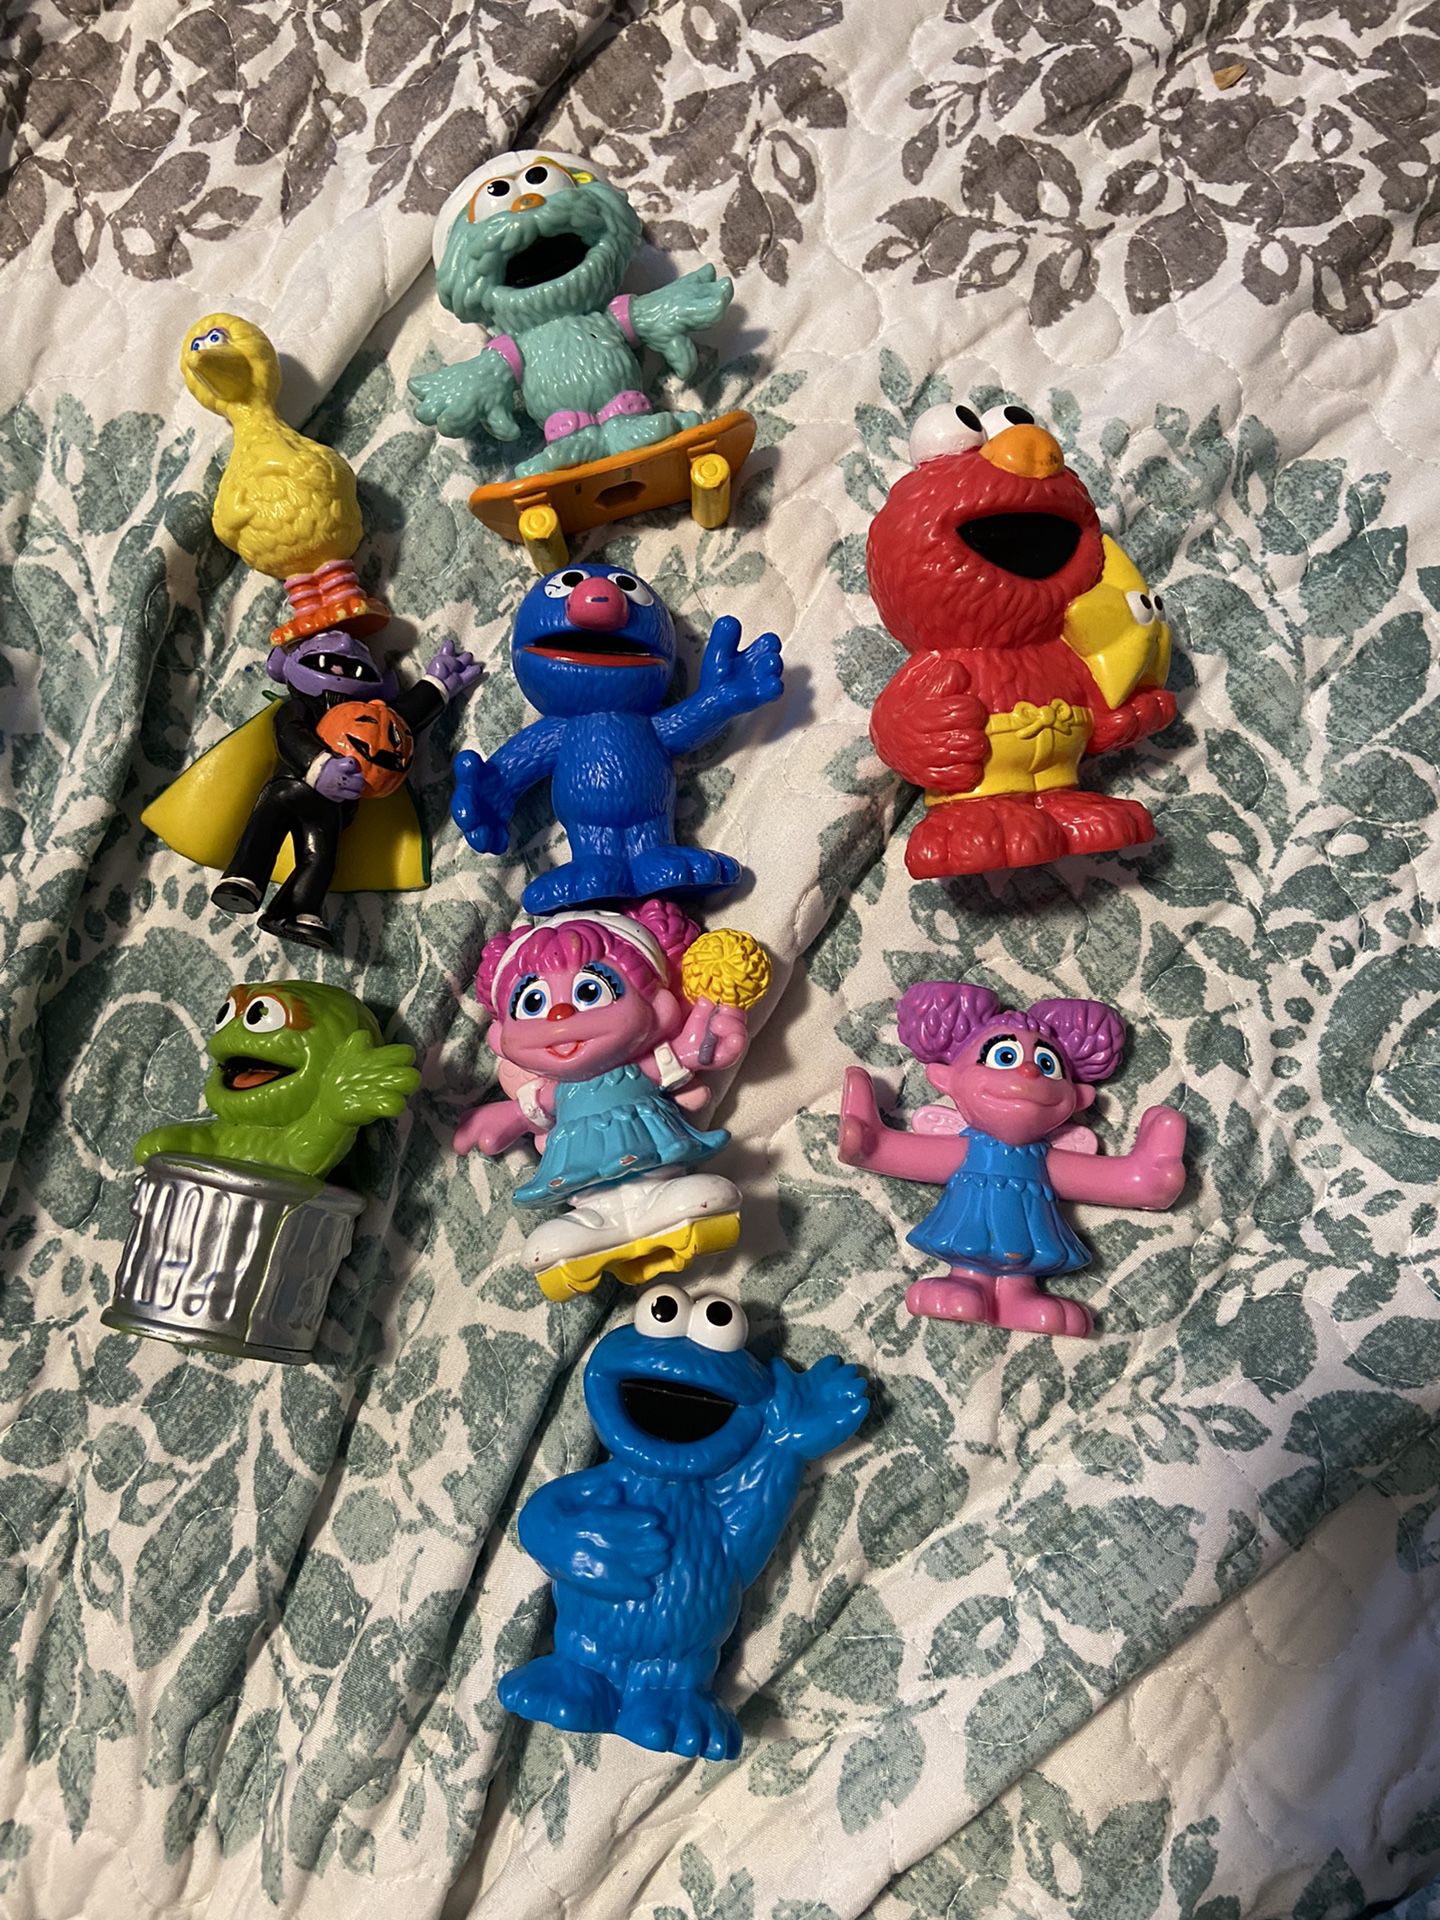 Sesame Street Toys And More! (see full post)